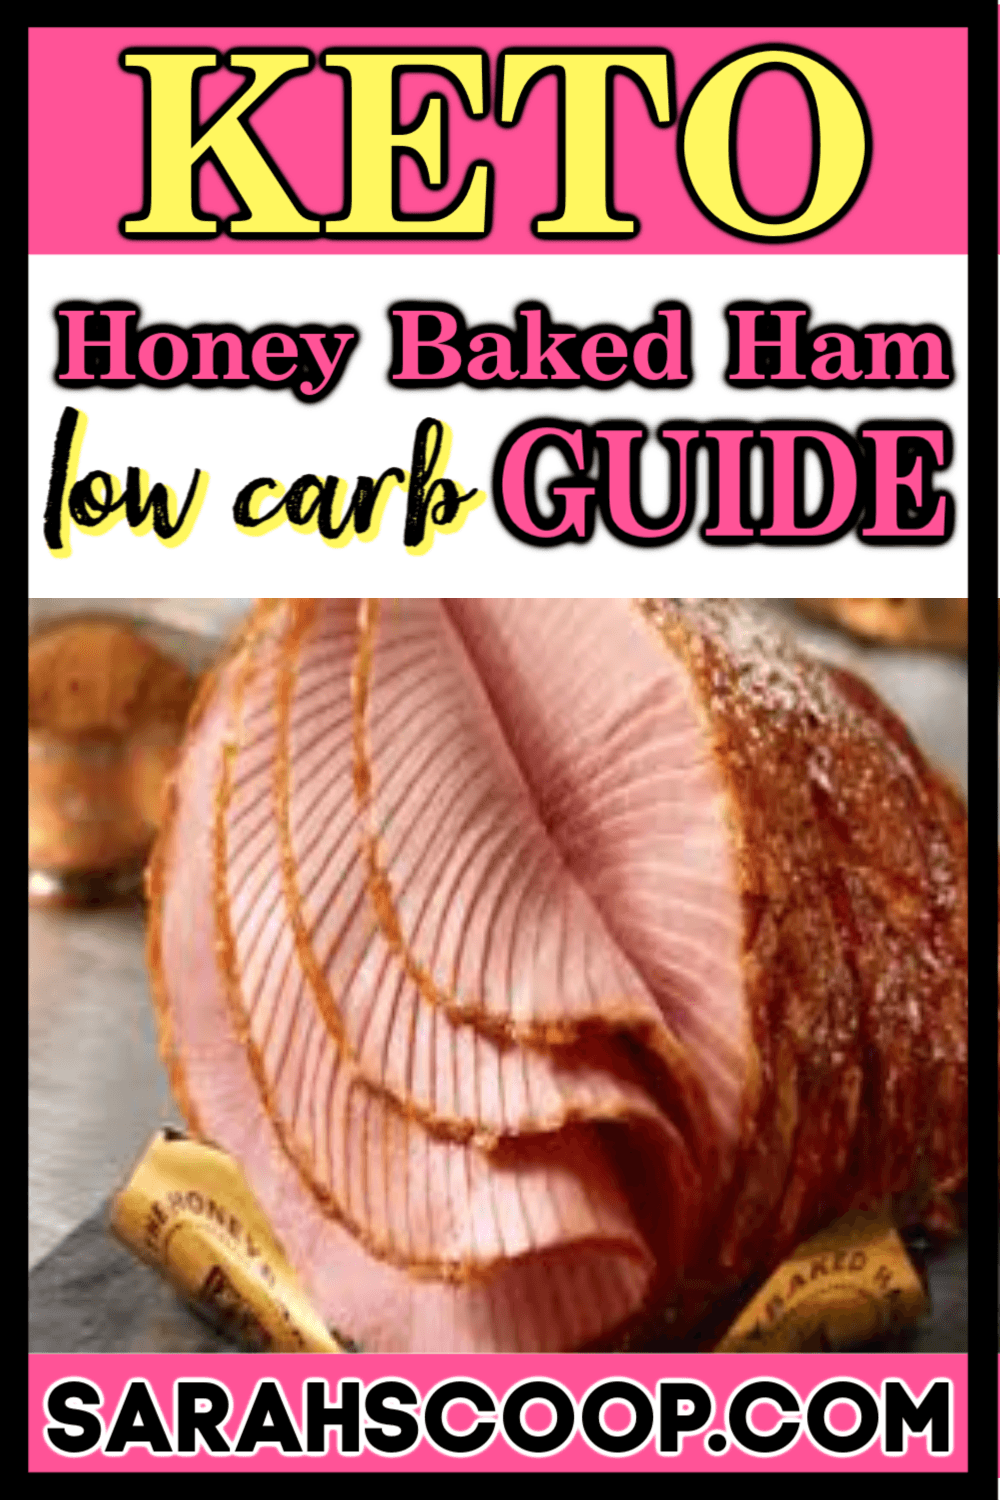 Keto low carb guide for honey baked ham.